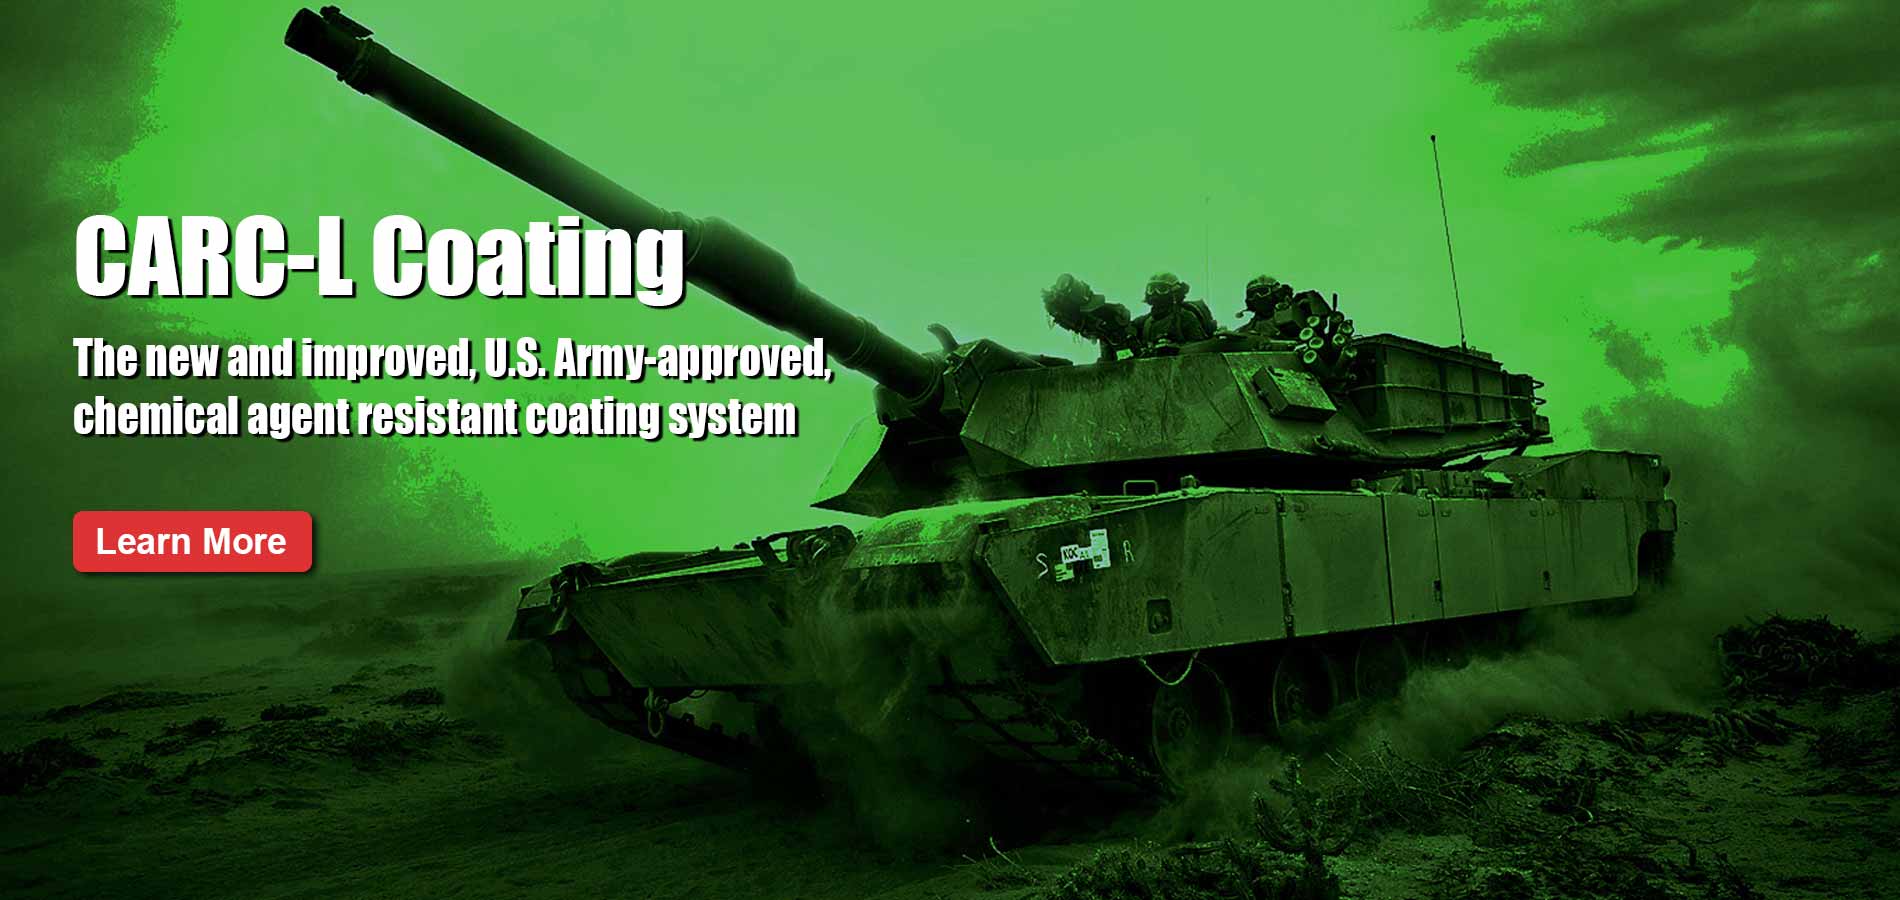 CARC-L Coating. The new and improved, U.S. Army-approved, chemical agent resistant coating system